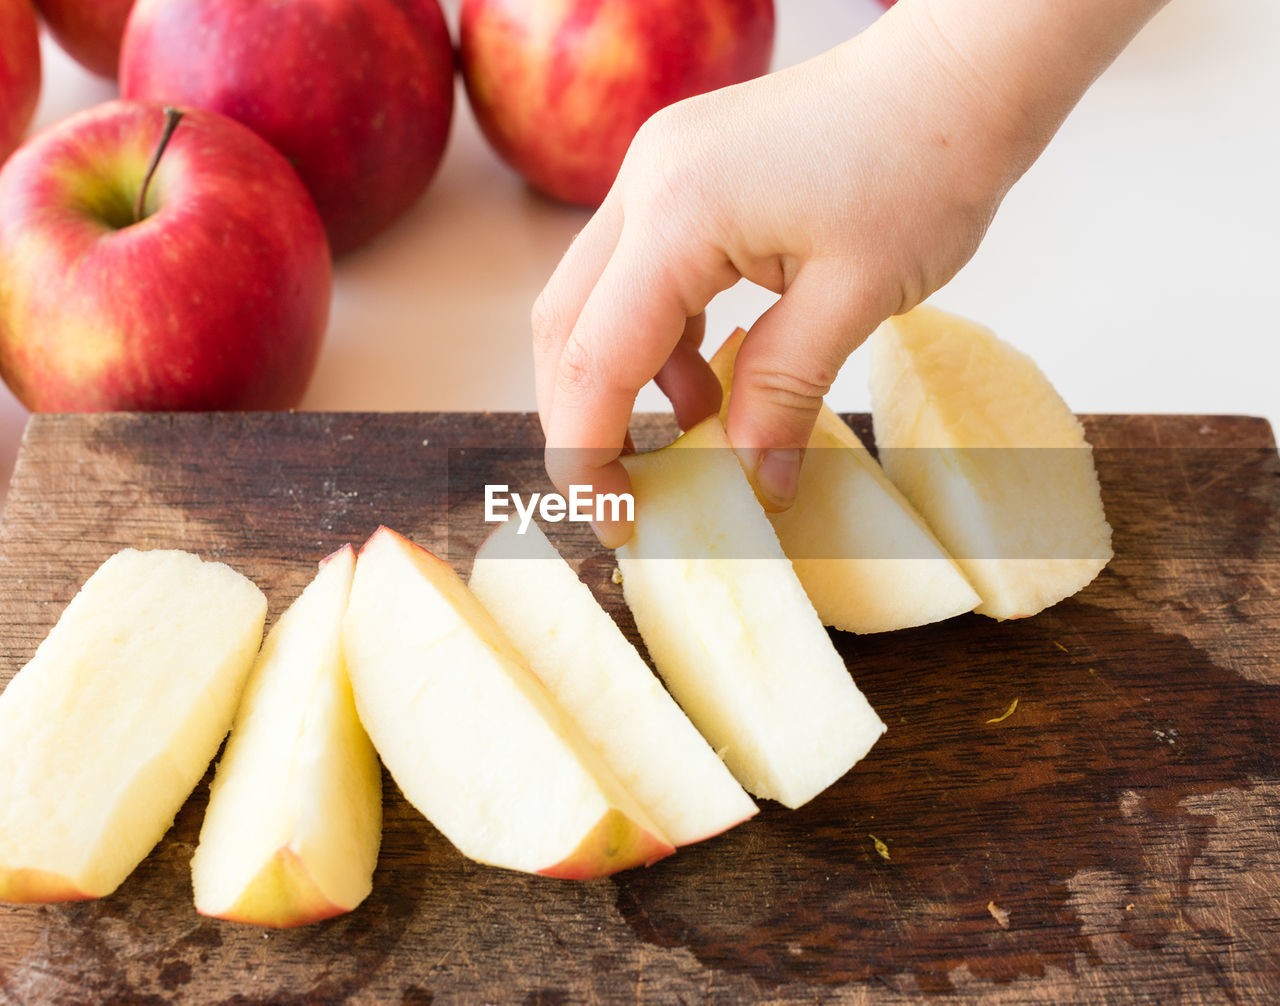 Cropped hand of child holding apple on cutting board